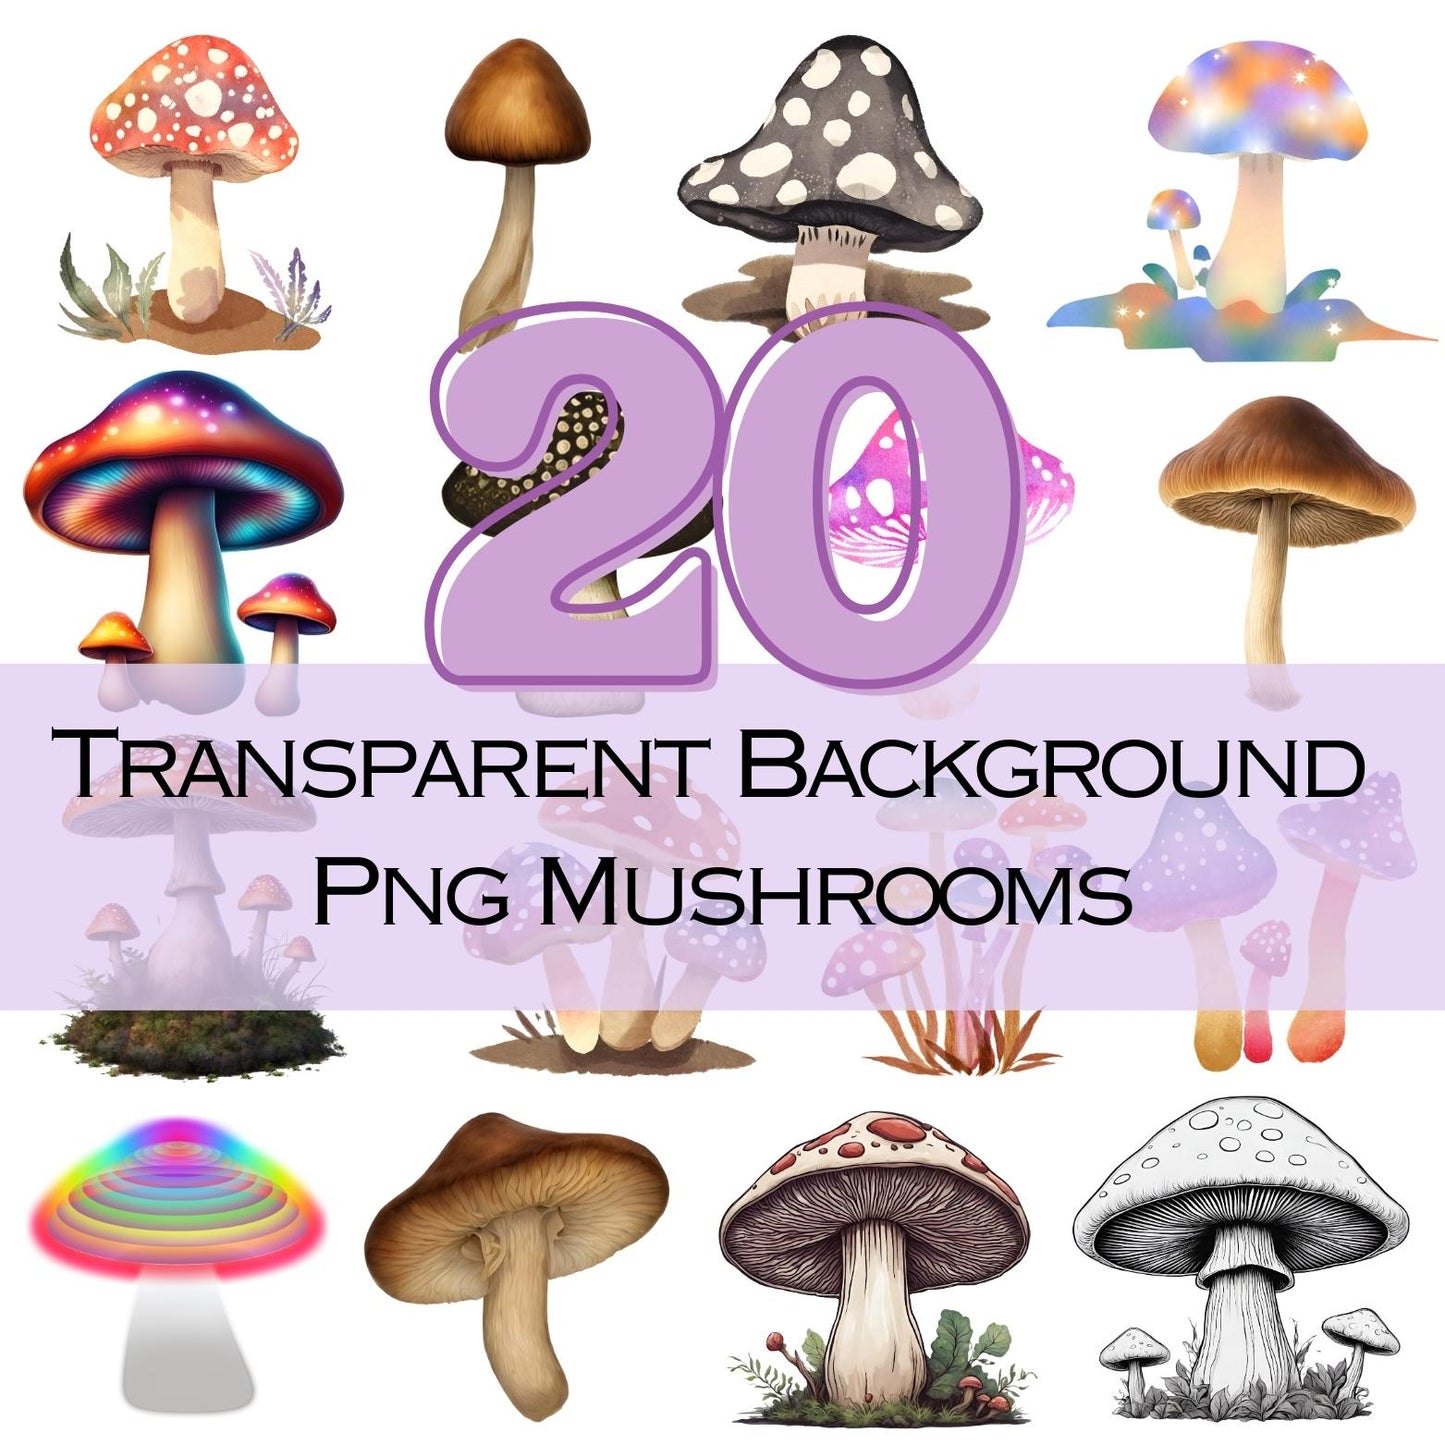 Mushroom Brushes and Stamps, PNG pack, Backgrounsd, and Bonus items!